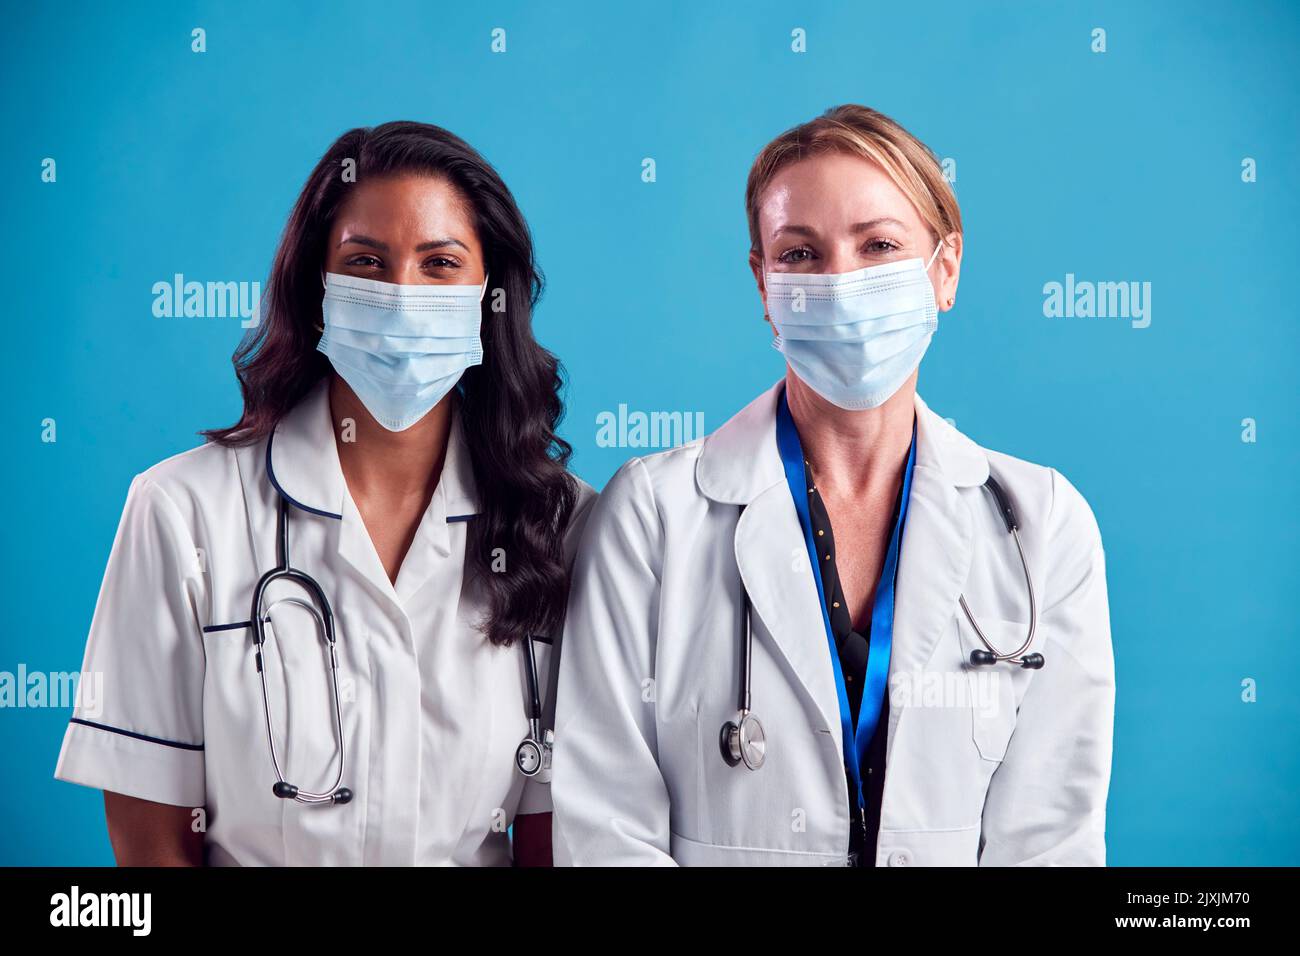 Portrait Of Female Doctor And Nurse Wearing Face Masks Standing In Front Of Blue Studio Background Stock Photo